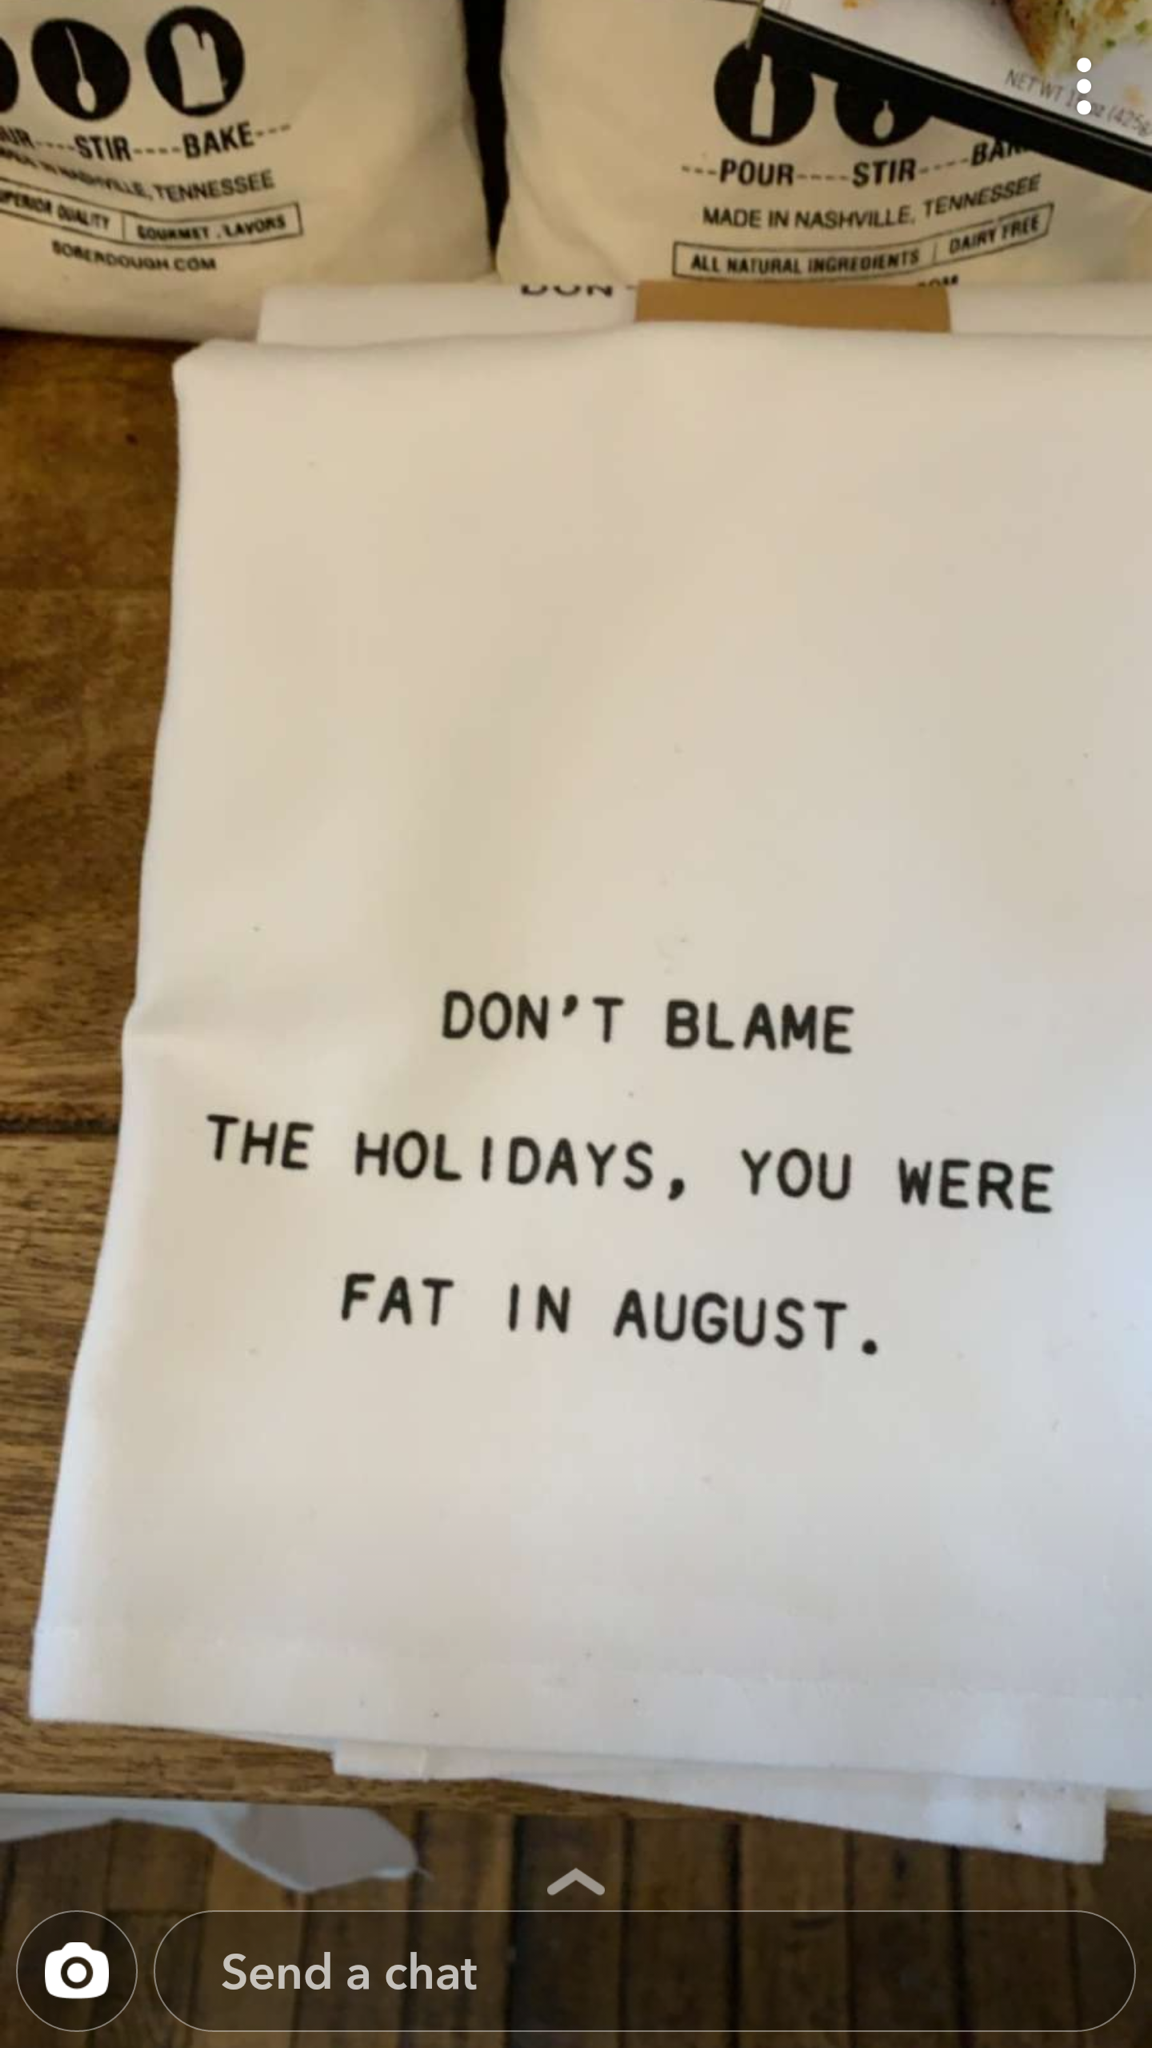 paper - Pounst Don'T Blame The Holidays, You Were Fat In August. O Send a chat